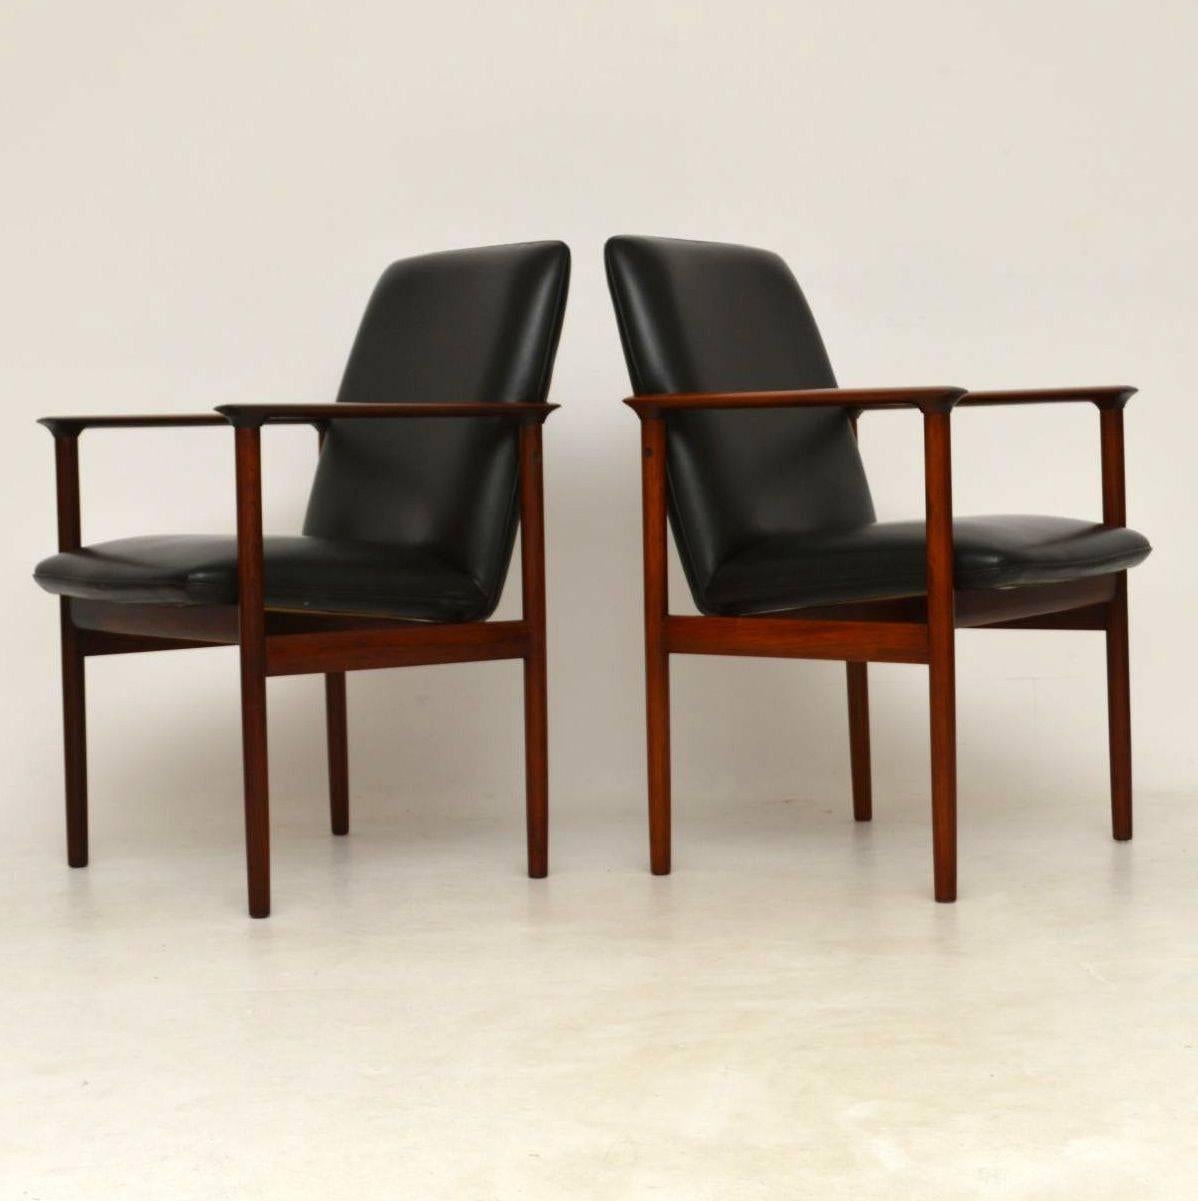 A very smart and top quality pair of armchairs, these were made in Denmark, they were designed by Arne Vodder, and they date from around the 1960s. The condition is superb for their age, with only some extremely minor wear to the polish here and